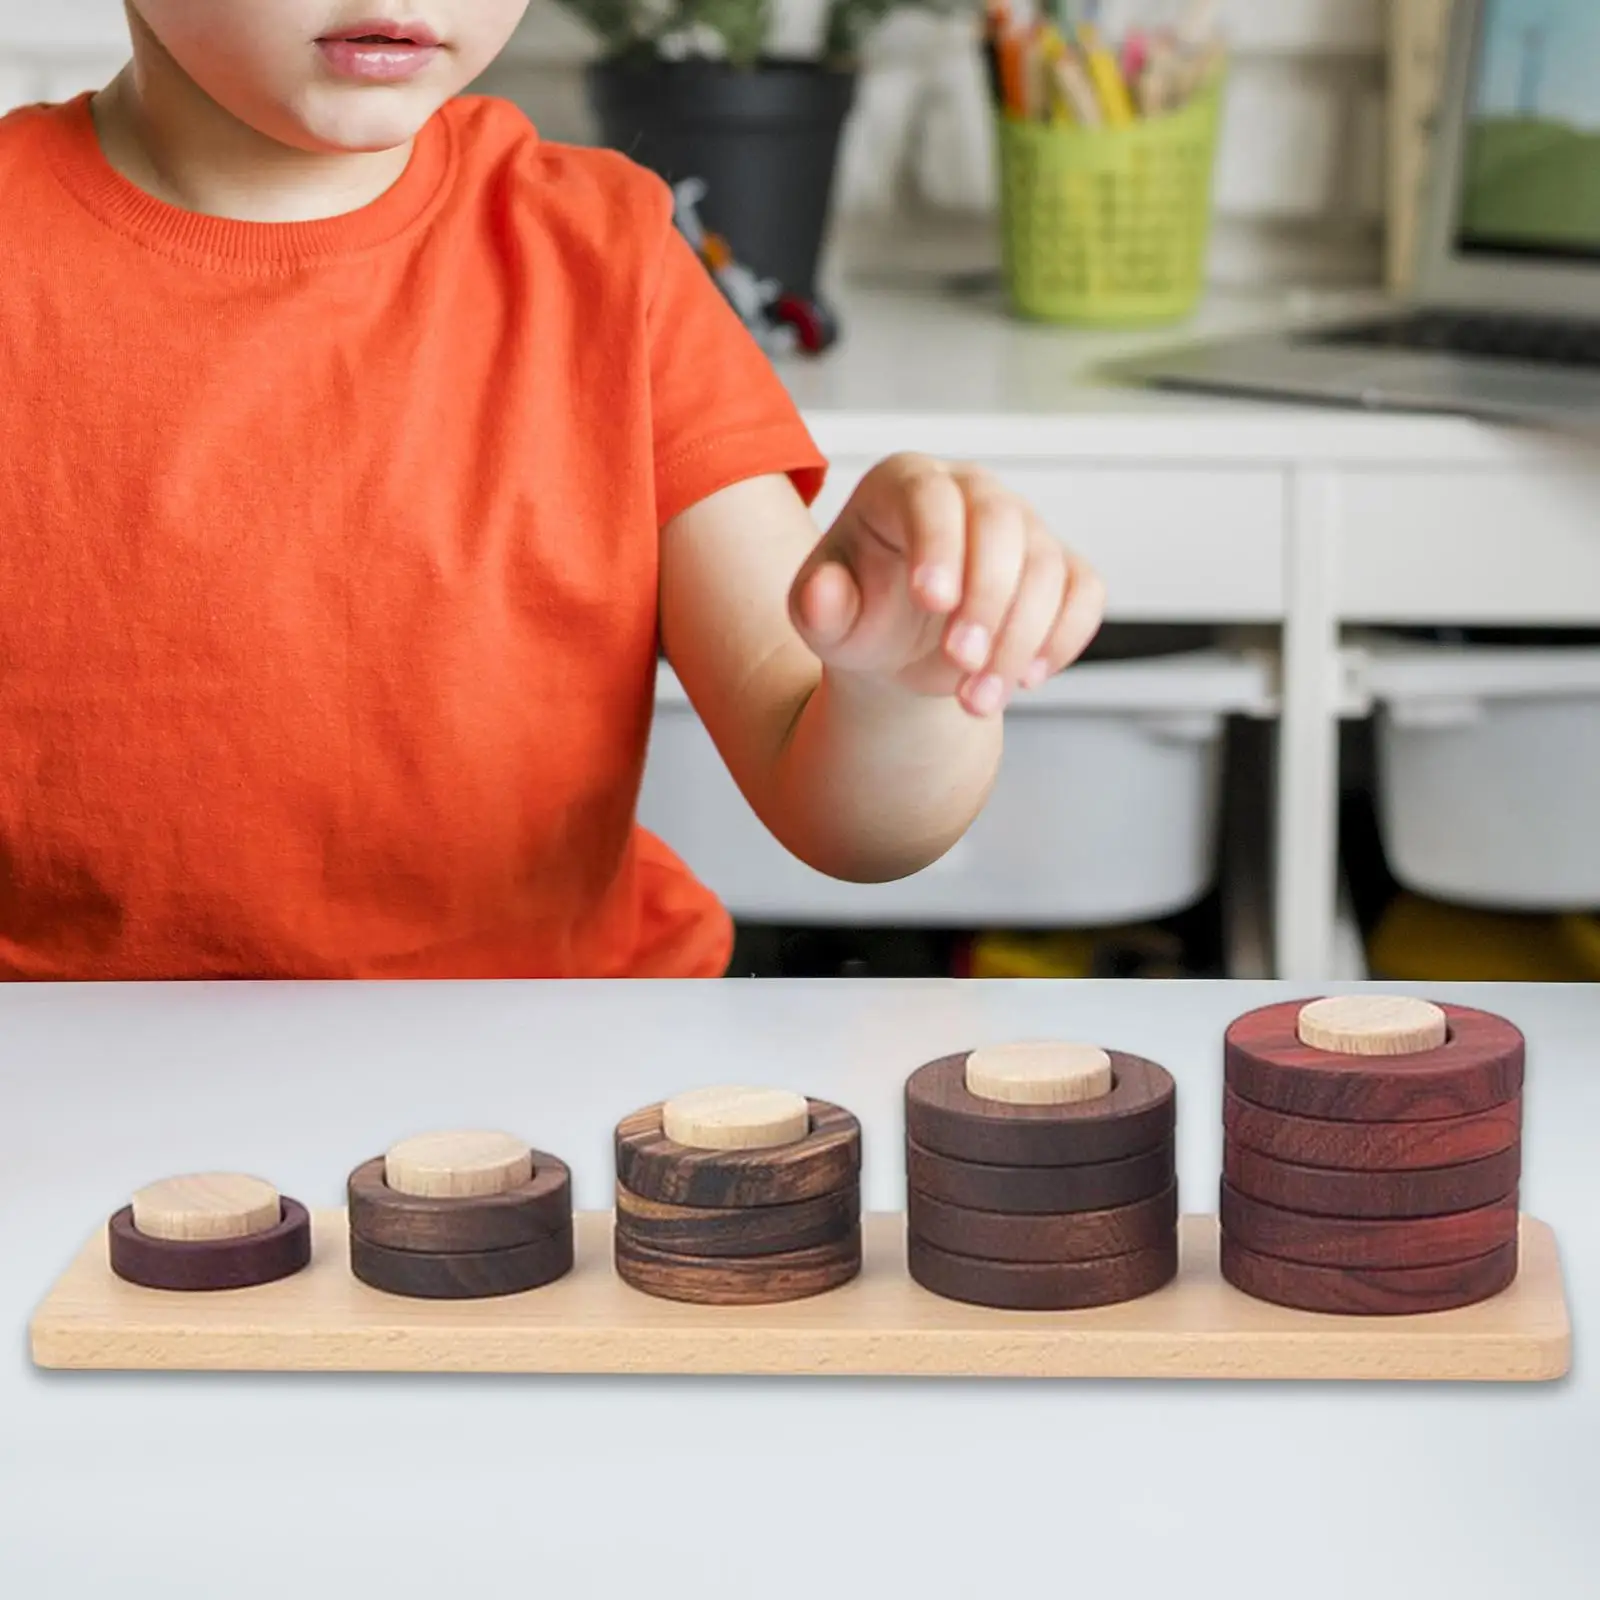 Wooden Stacking Toys Sensory Toys Fine Motor Skills Round Blocks Educational Learning Toy for Toddlers Girls Boy Birthday Gifts